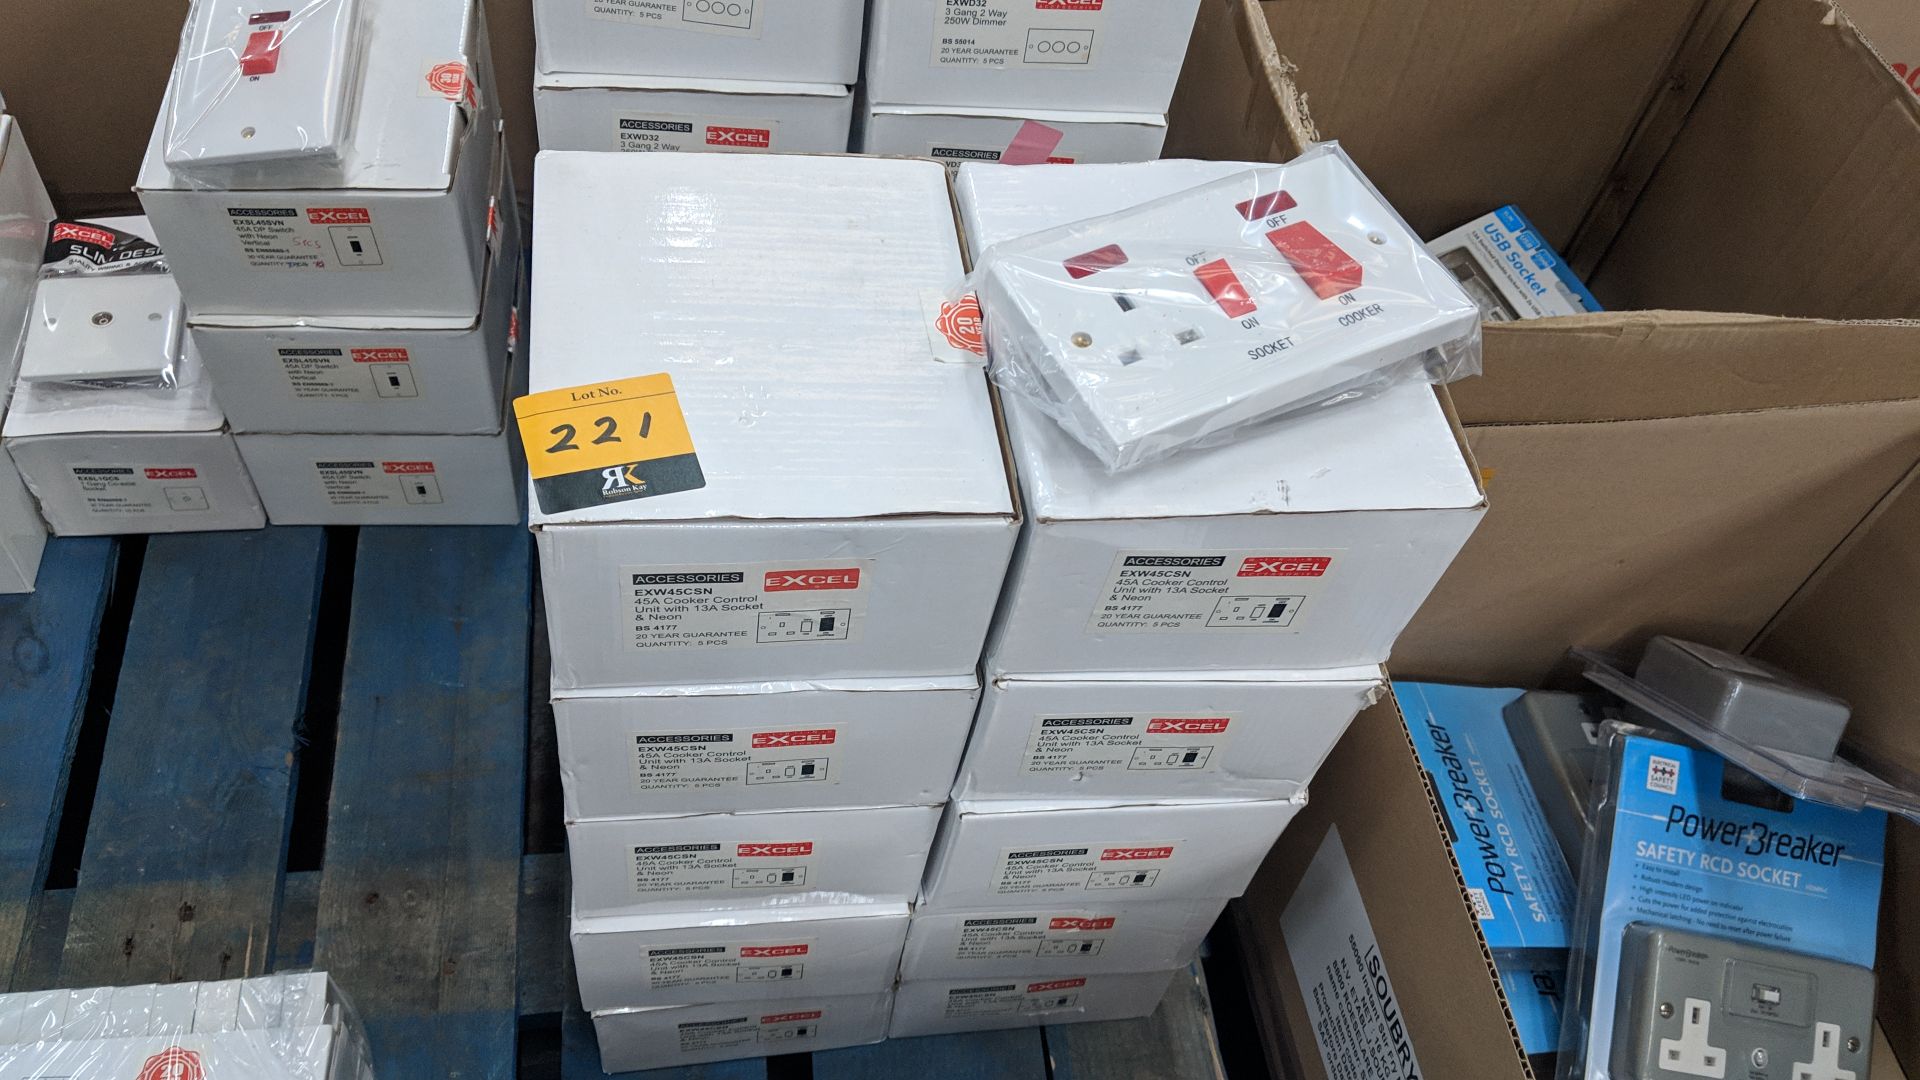 10 boxes of Excel 45A cooker control units with 13A socket & neon - each box typically contains 5